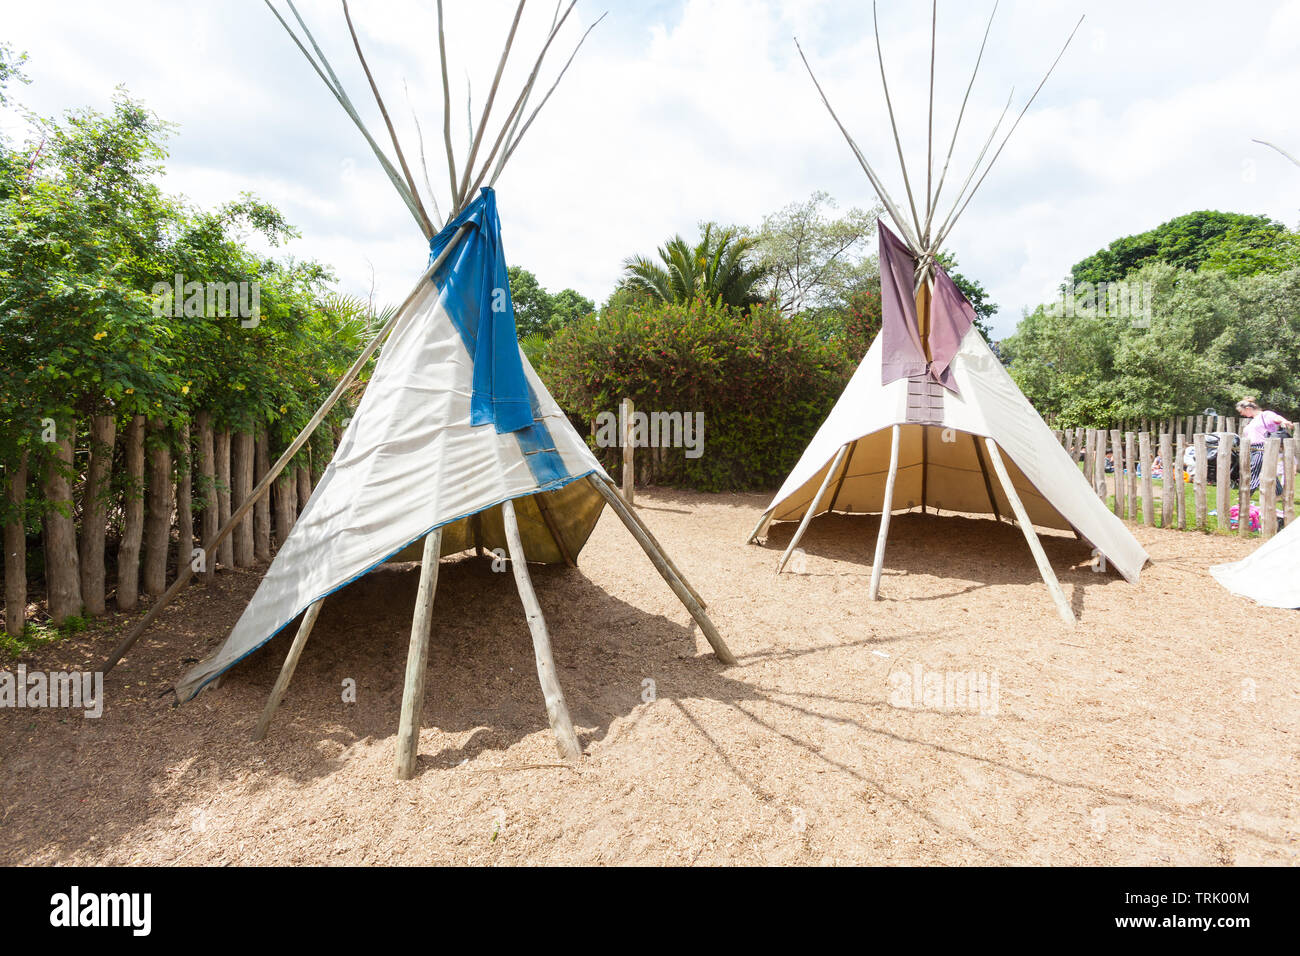 Tipi tents at The Diana, Princess of Wales Memorial Playground is a  memorial to Diana, Princess of Wales in Kensington Gardens, London, England  Stock Photo - Alamy